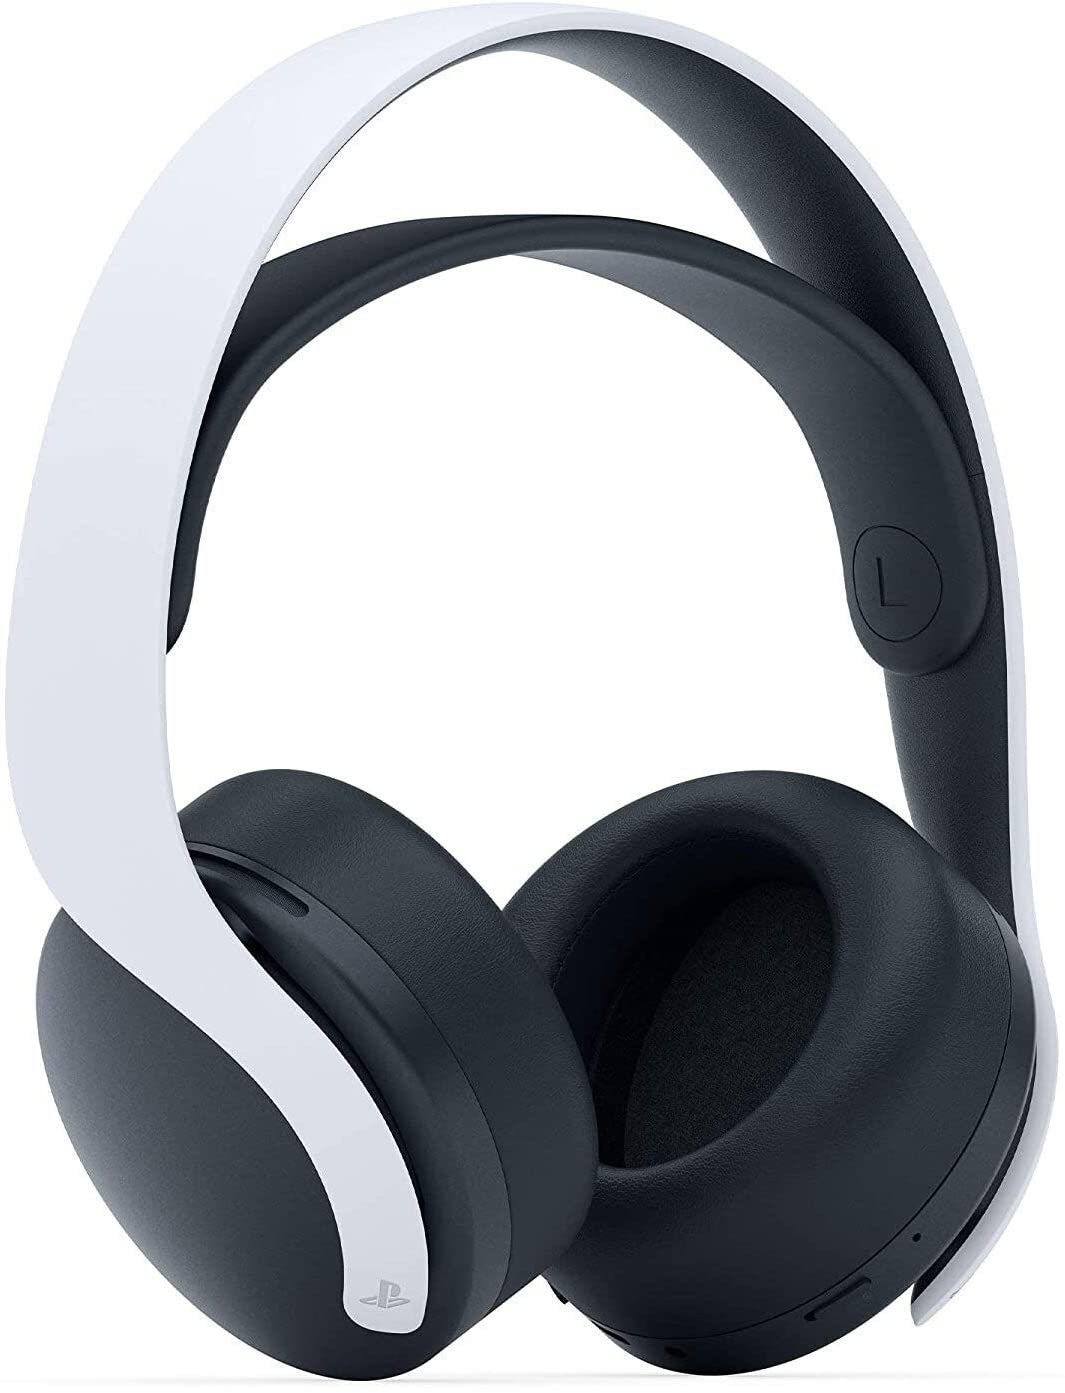 Sony Pulse 3D Wireless Headset for PlayStation 5 &amp; PlayStation 4 - White (Certified Refurbished)